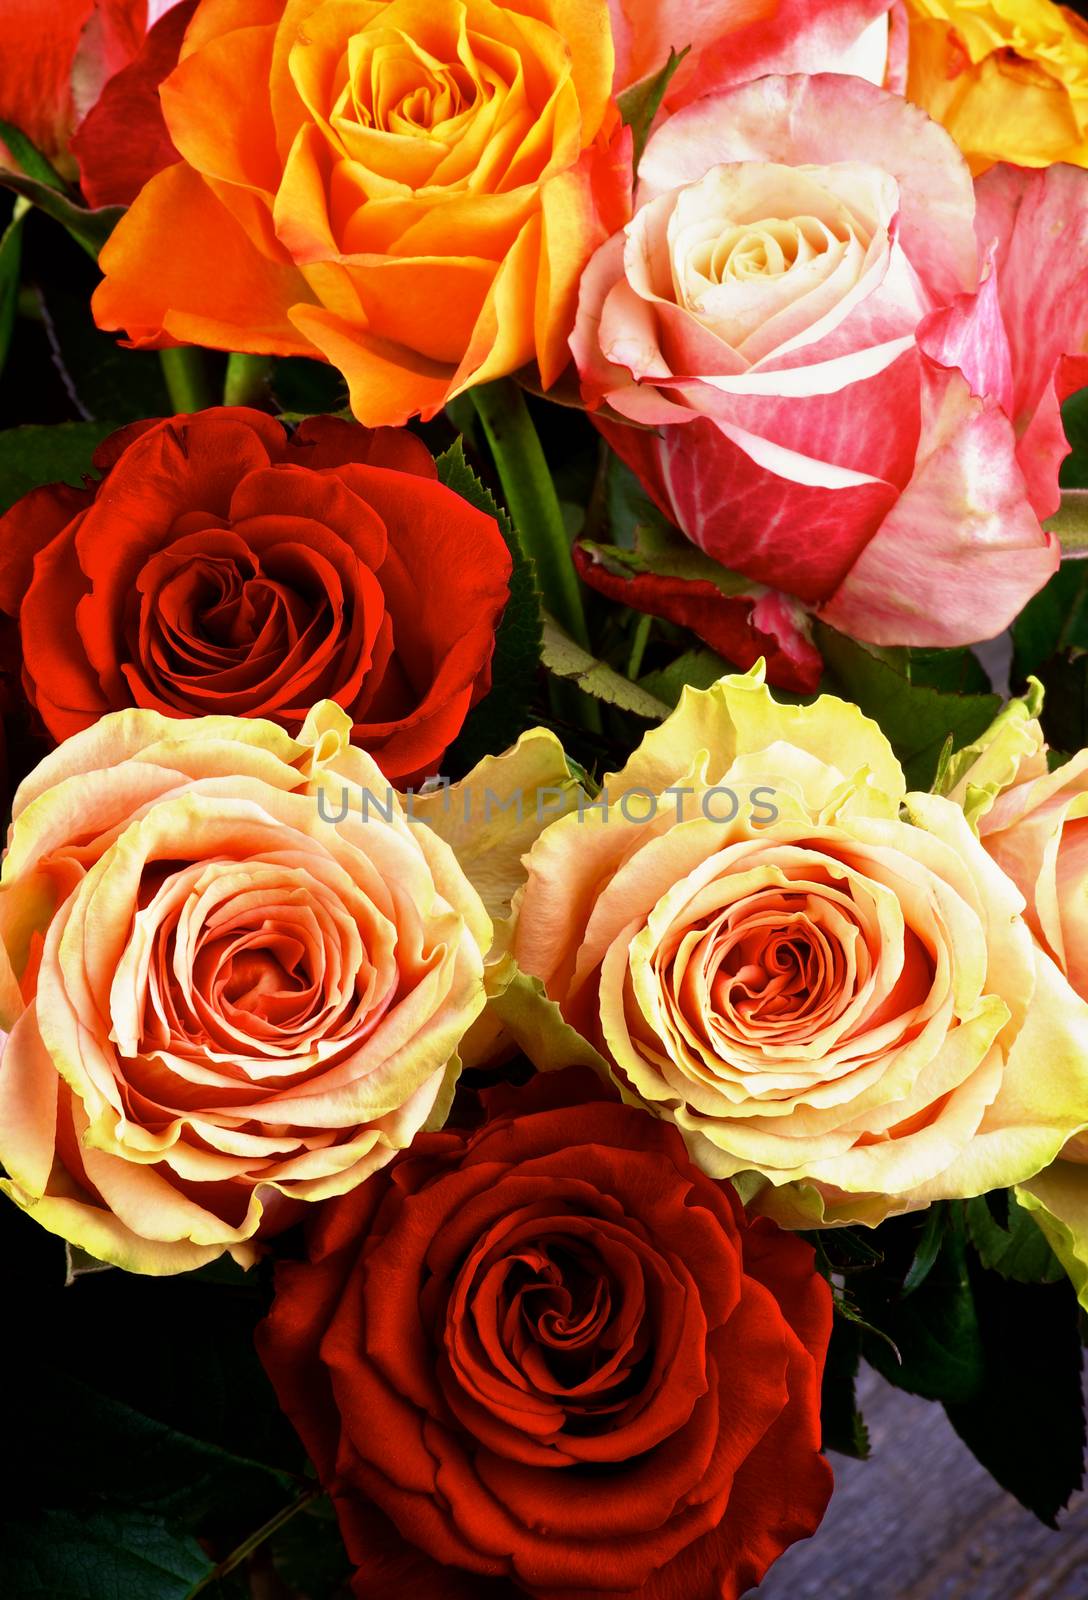 Colorful Roses by zhekos